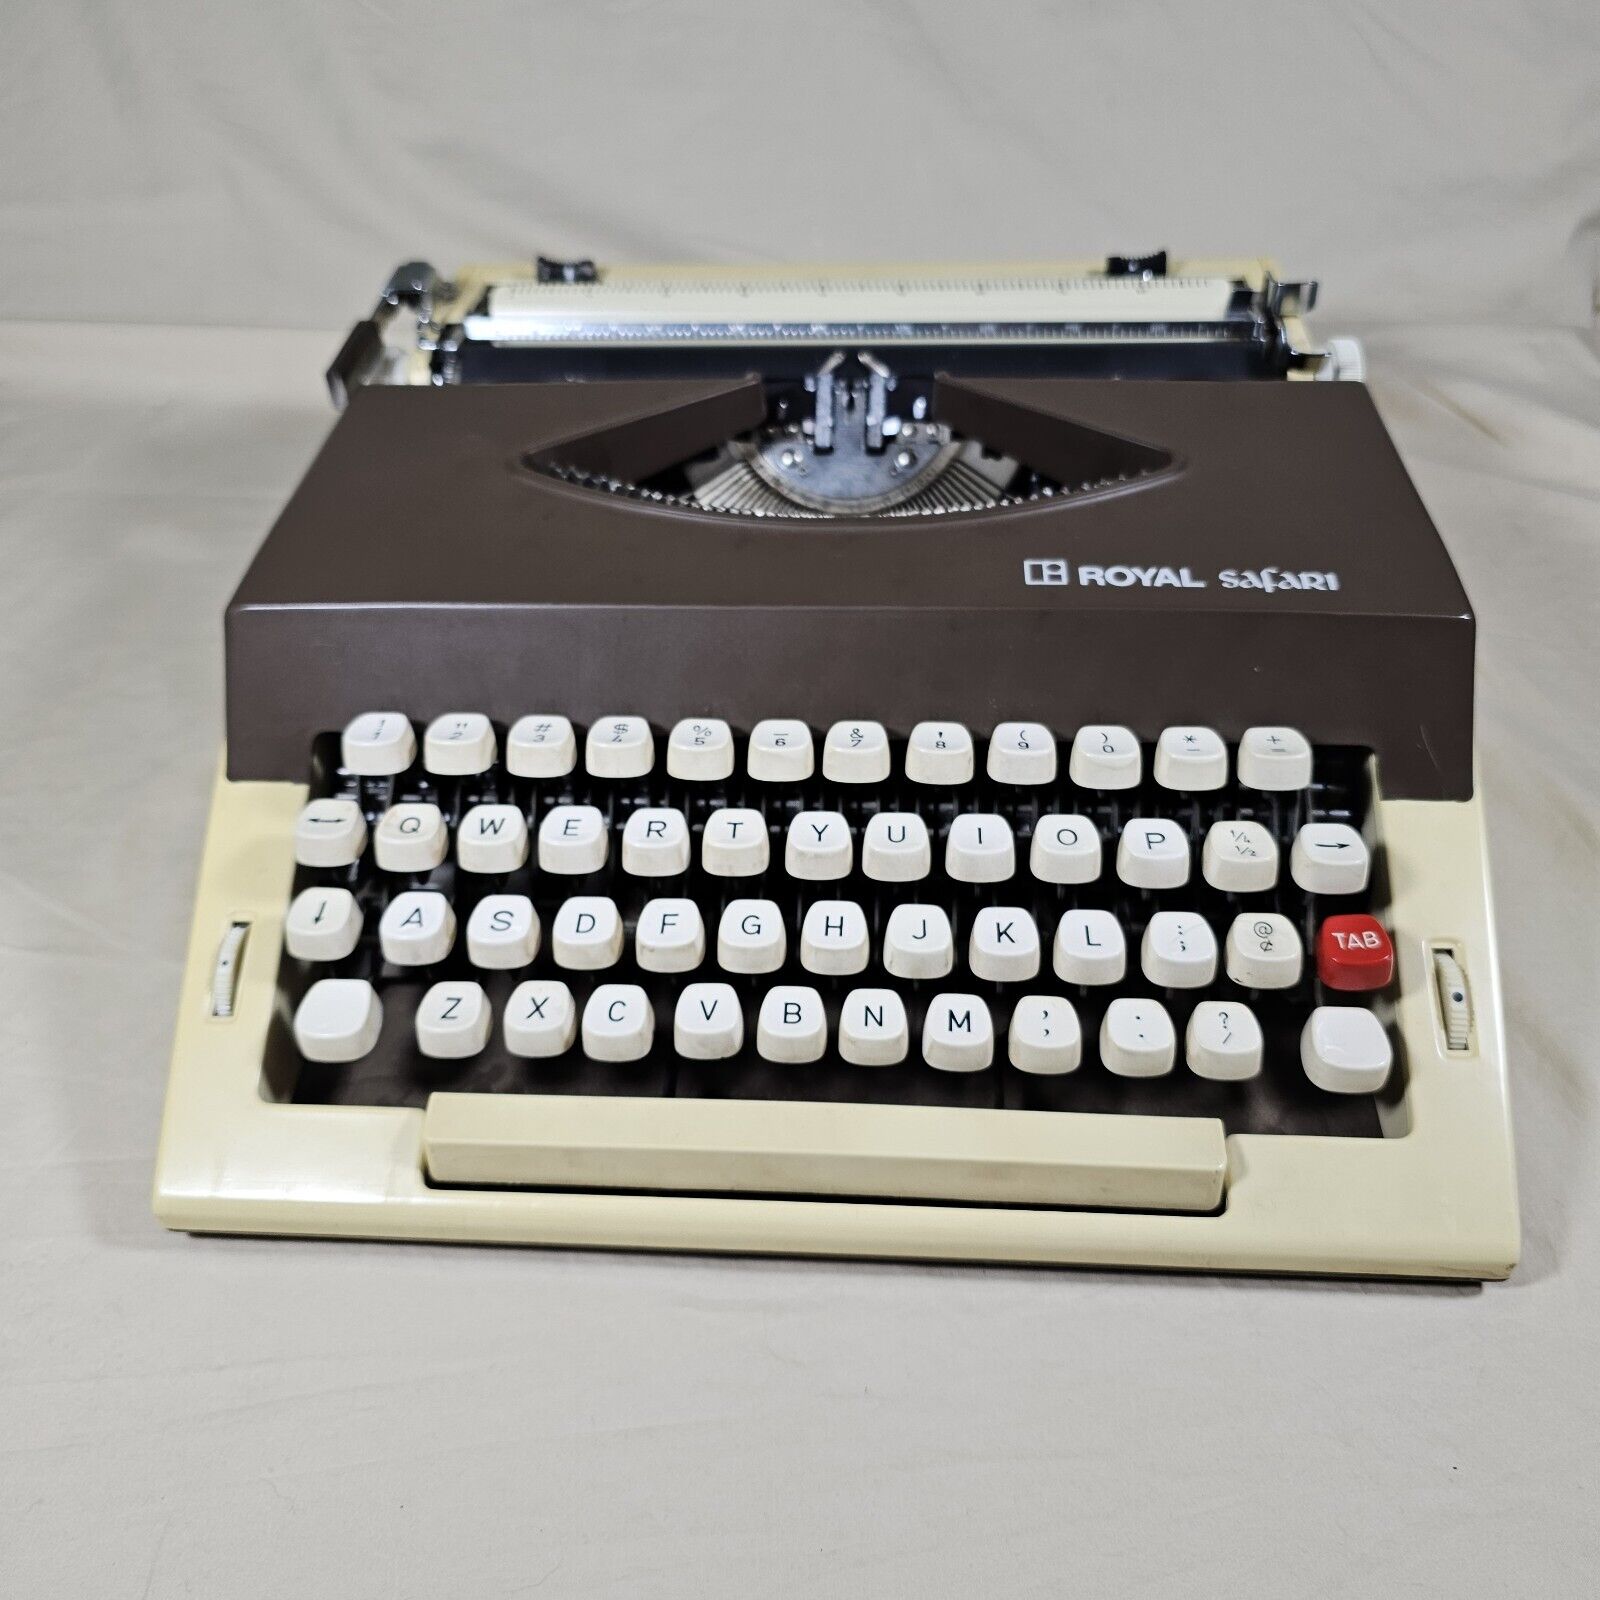 1960s Royal Safari Portable Typewriter in Working Condition With Case